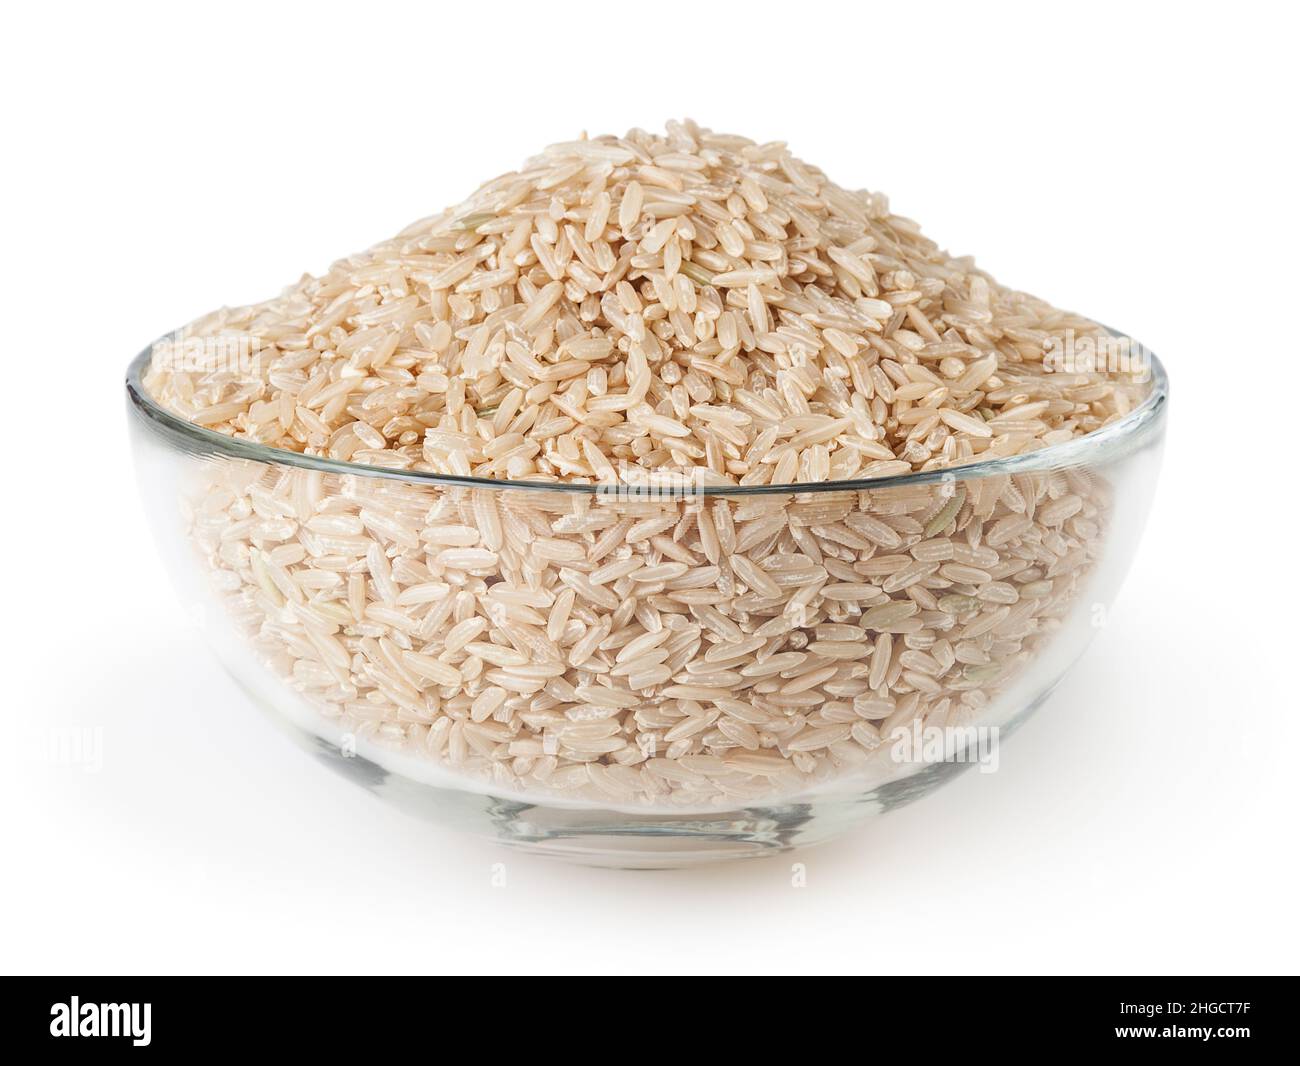 Uncooked brown rice in glass bowl isolated on white background Stock Photo